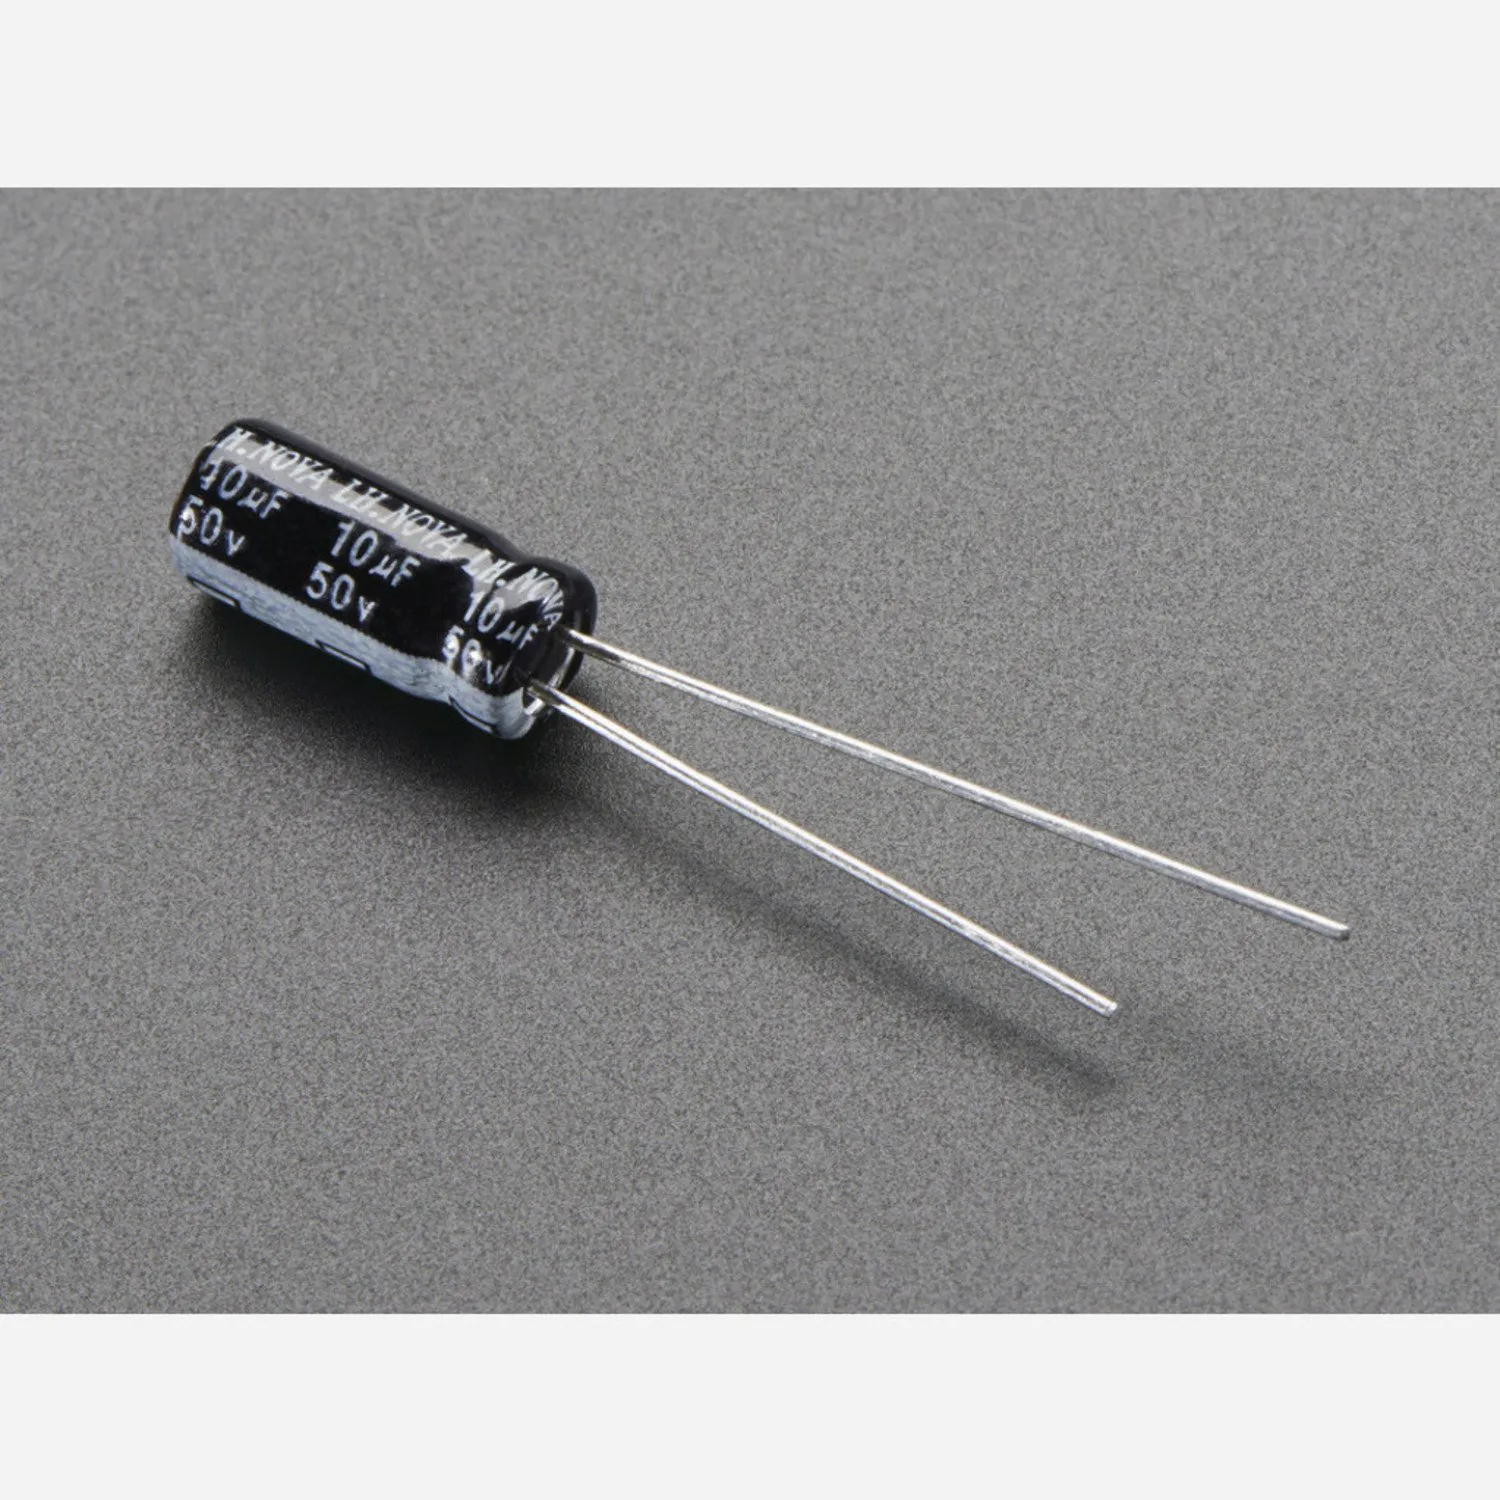 Photo of 10uF 50V Electrolytic Capacitors - Pack of 10